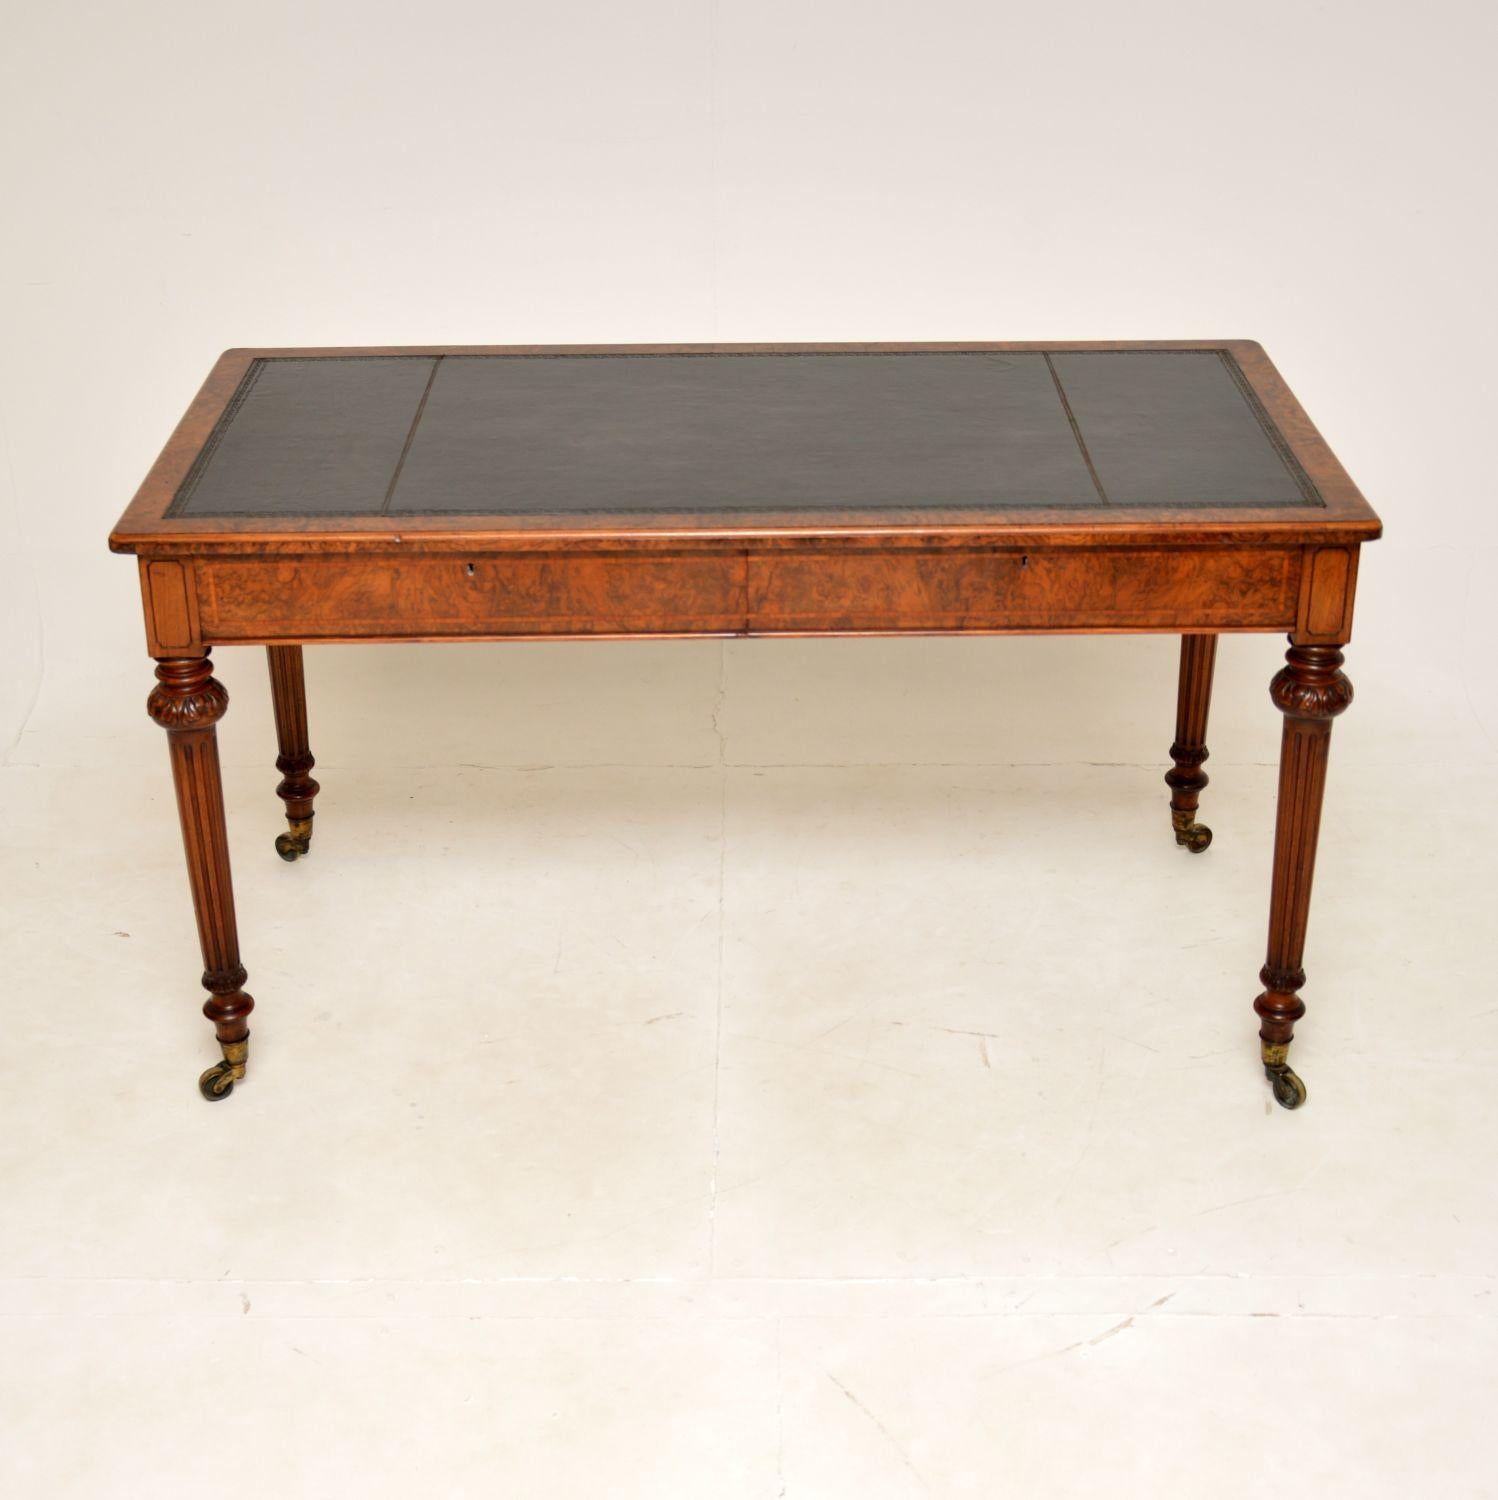 A superb antique Victorian leather top writing table / desk in burr walnut. This was made in England by Holland & Sons, it dates from around 1860-1880.

The quality is outstanding, this is as fine a writing table of the period as you could find. The